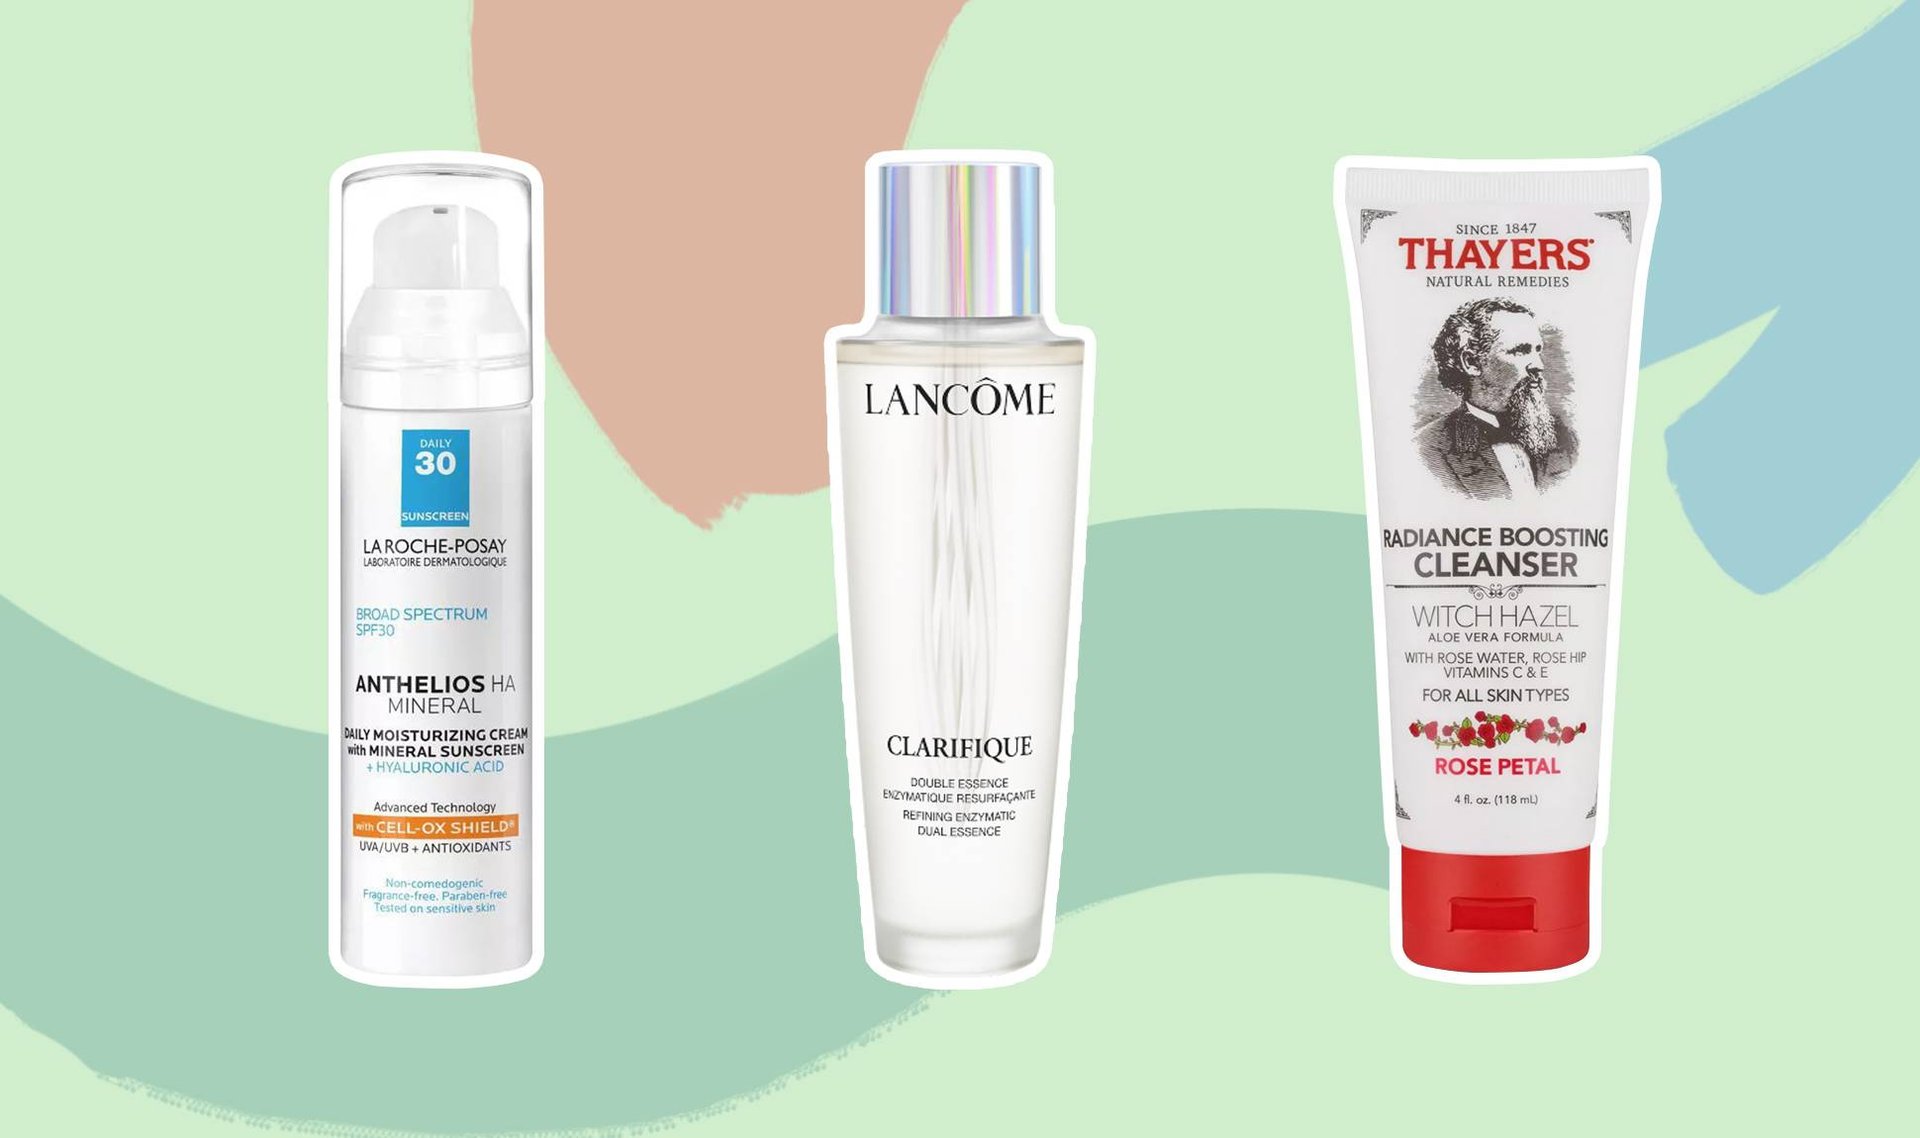 Our Editors Have Fallen in Love With These 7 New Skin-Care Products This Month